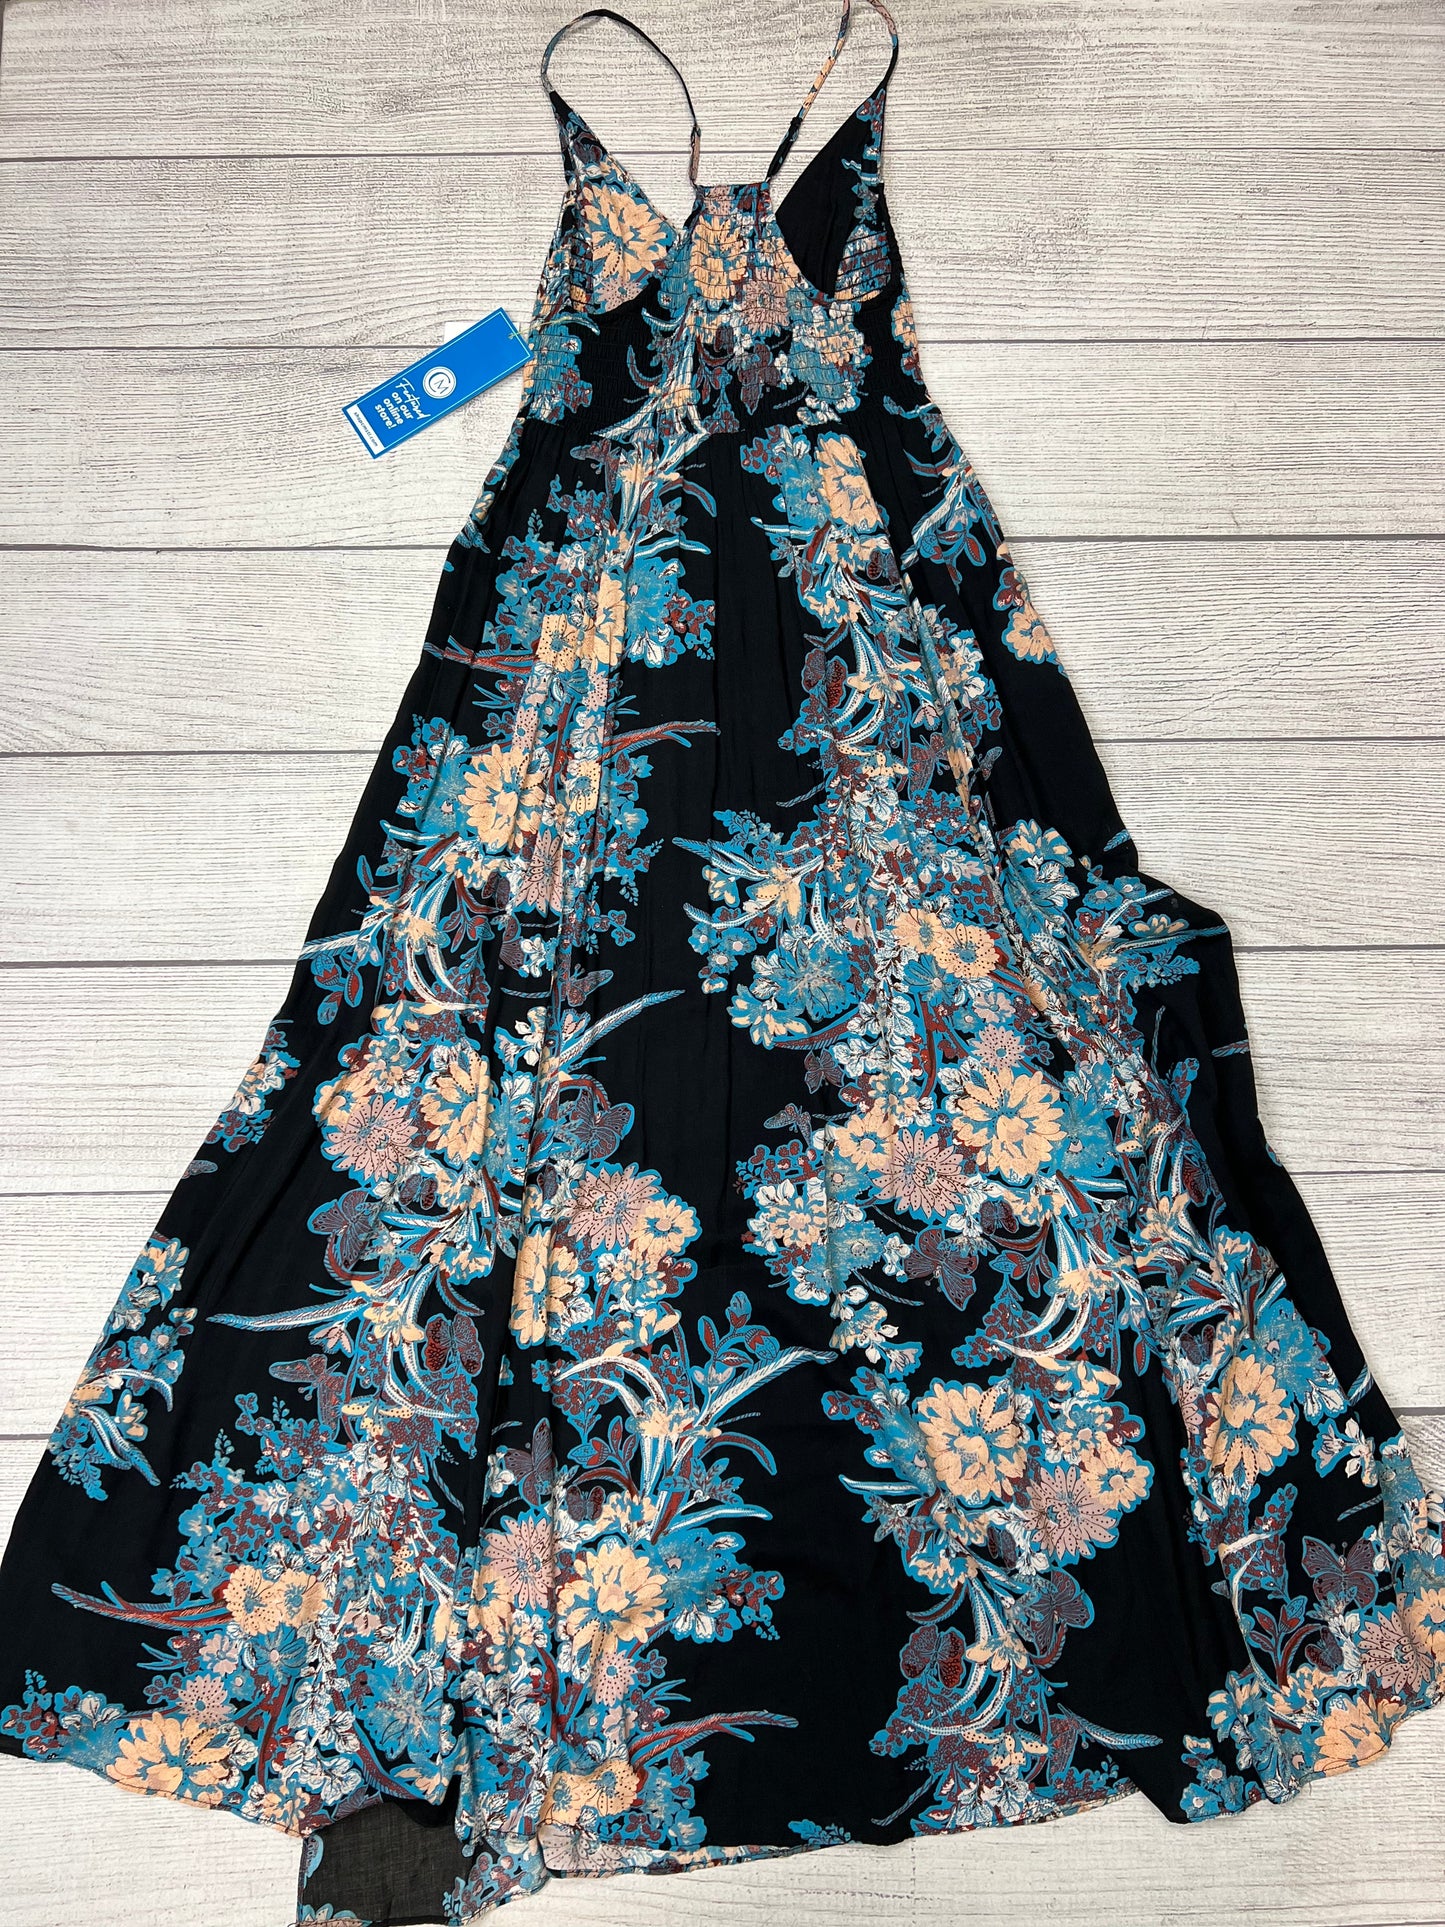 Floral Dress Casual Maxi Free People, Size S